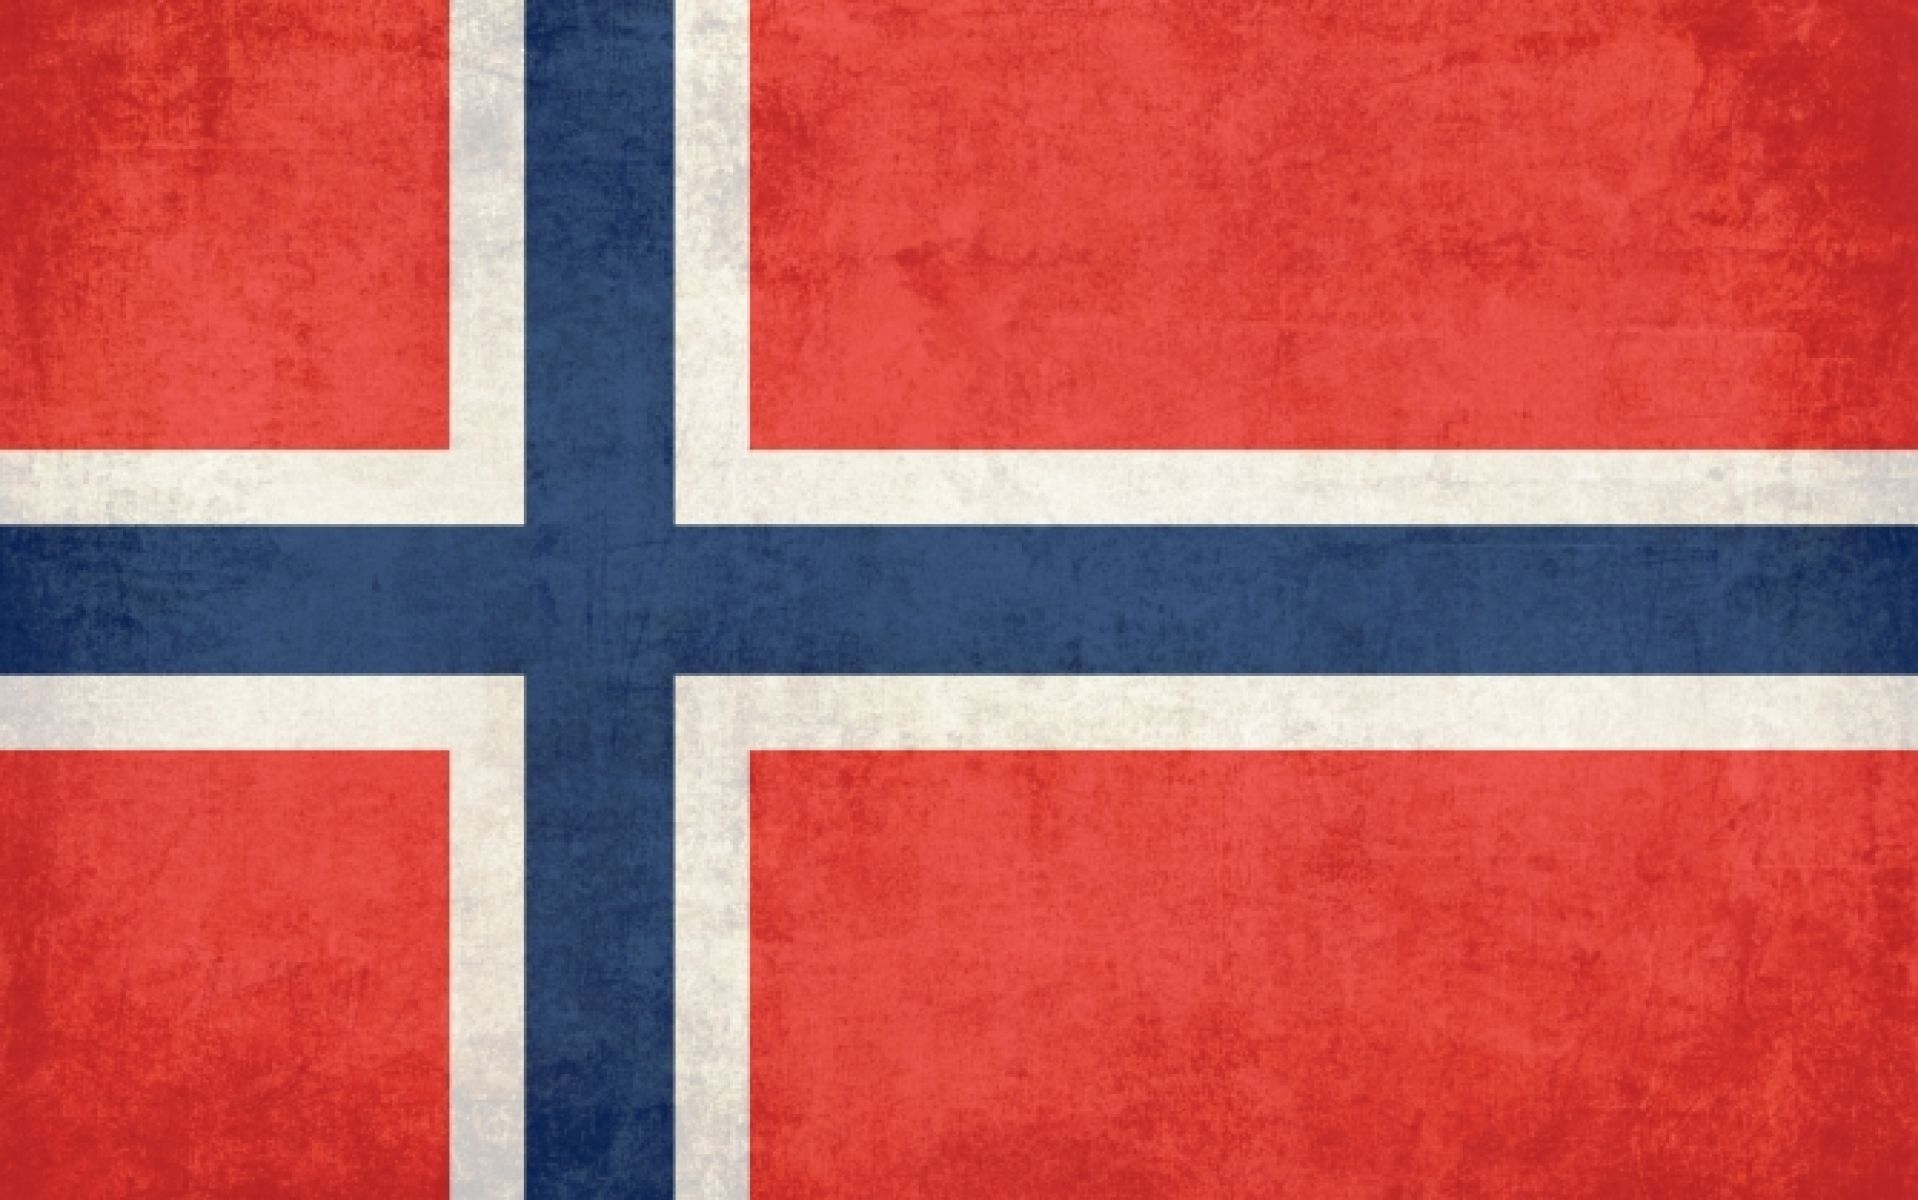 My Country NORWAY: Hand-Painted Band for Apple Watch Inspired by NATIONAL FLAG of Norway